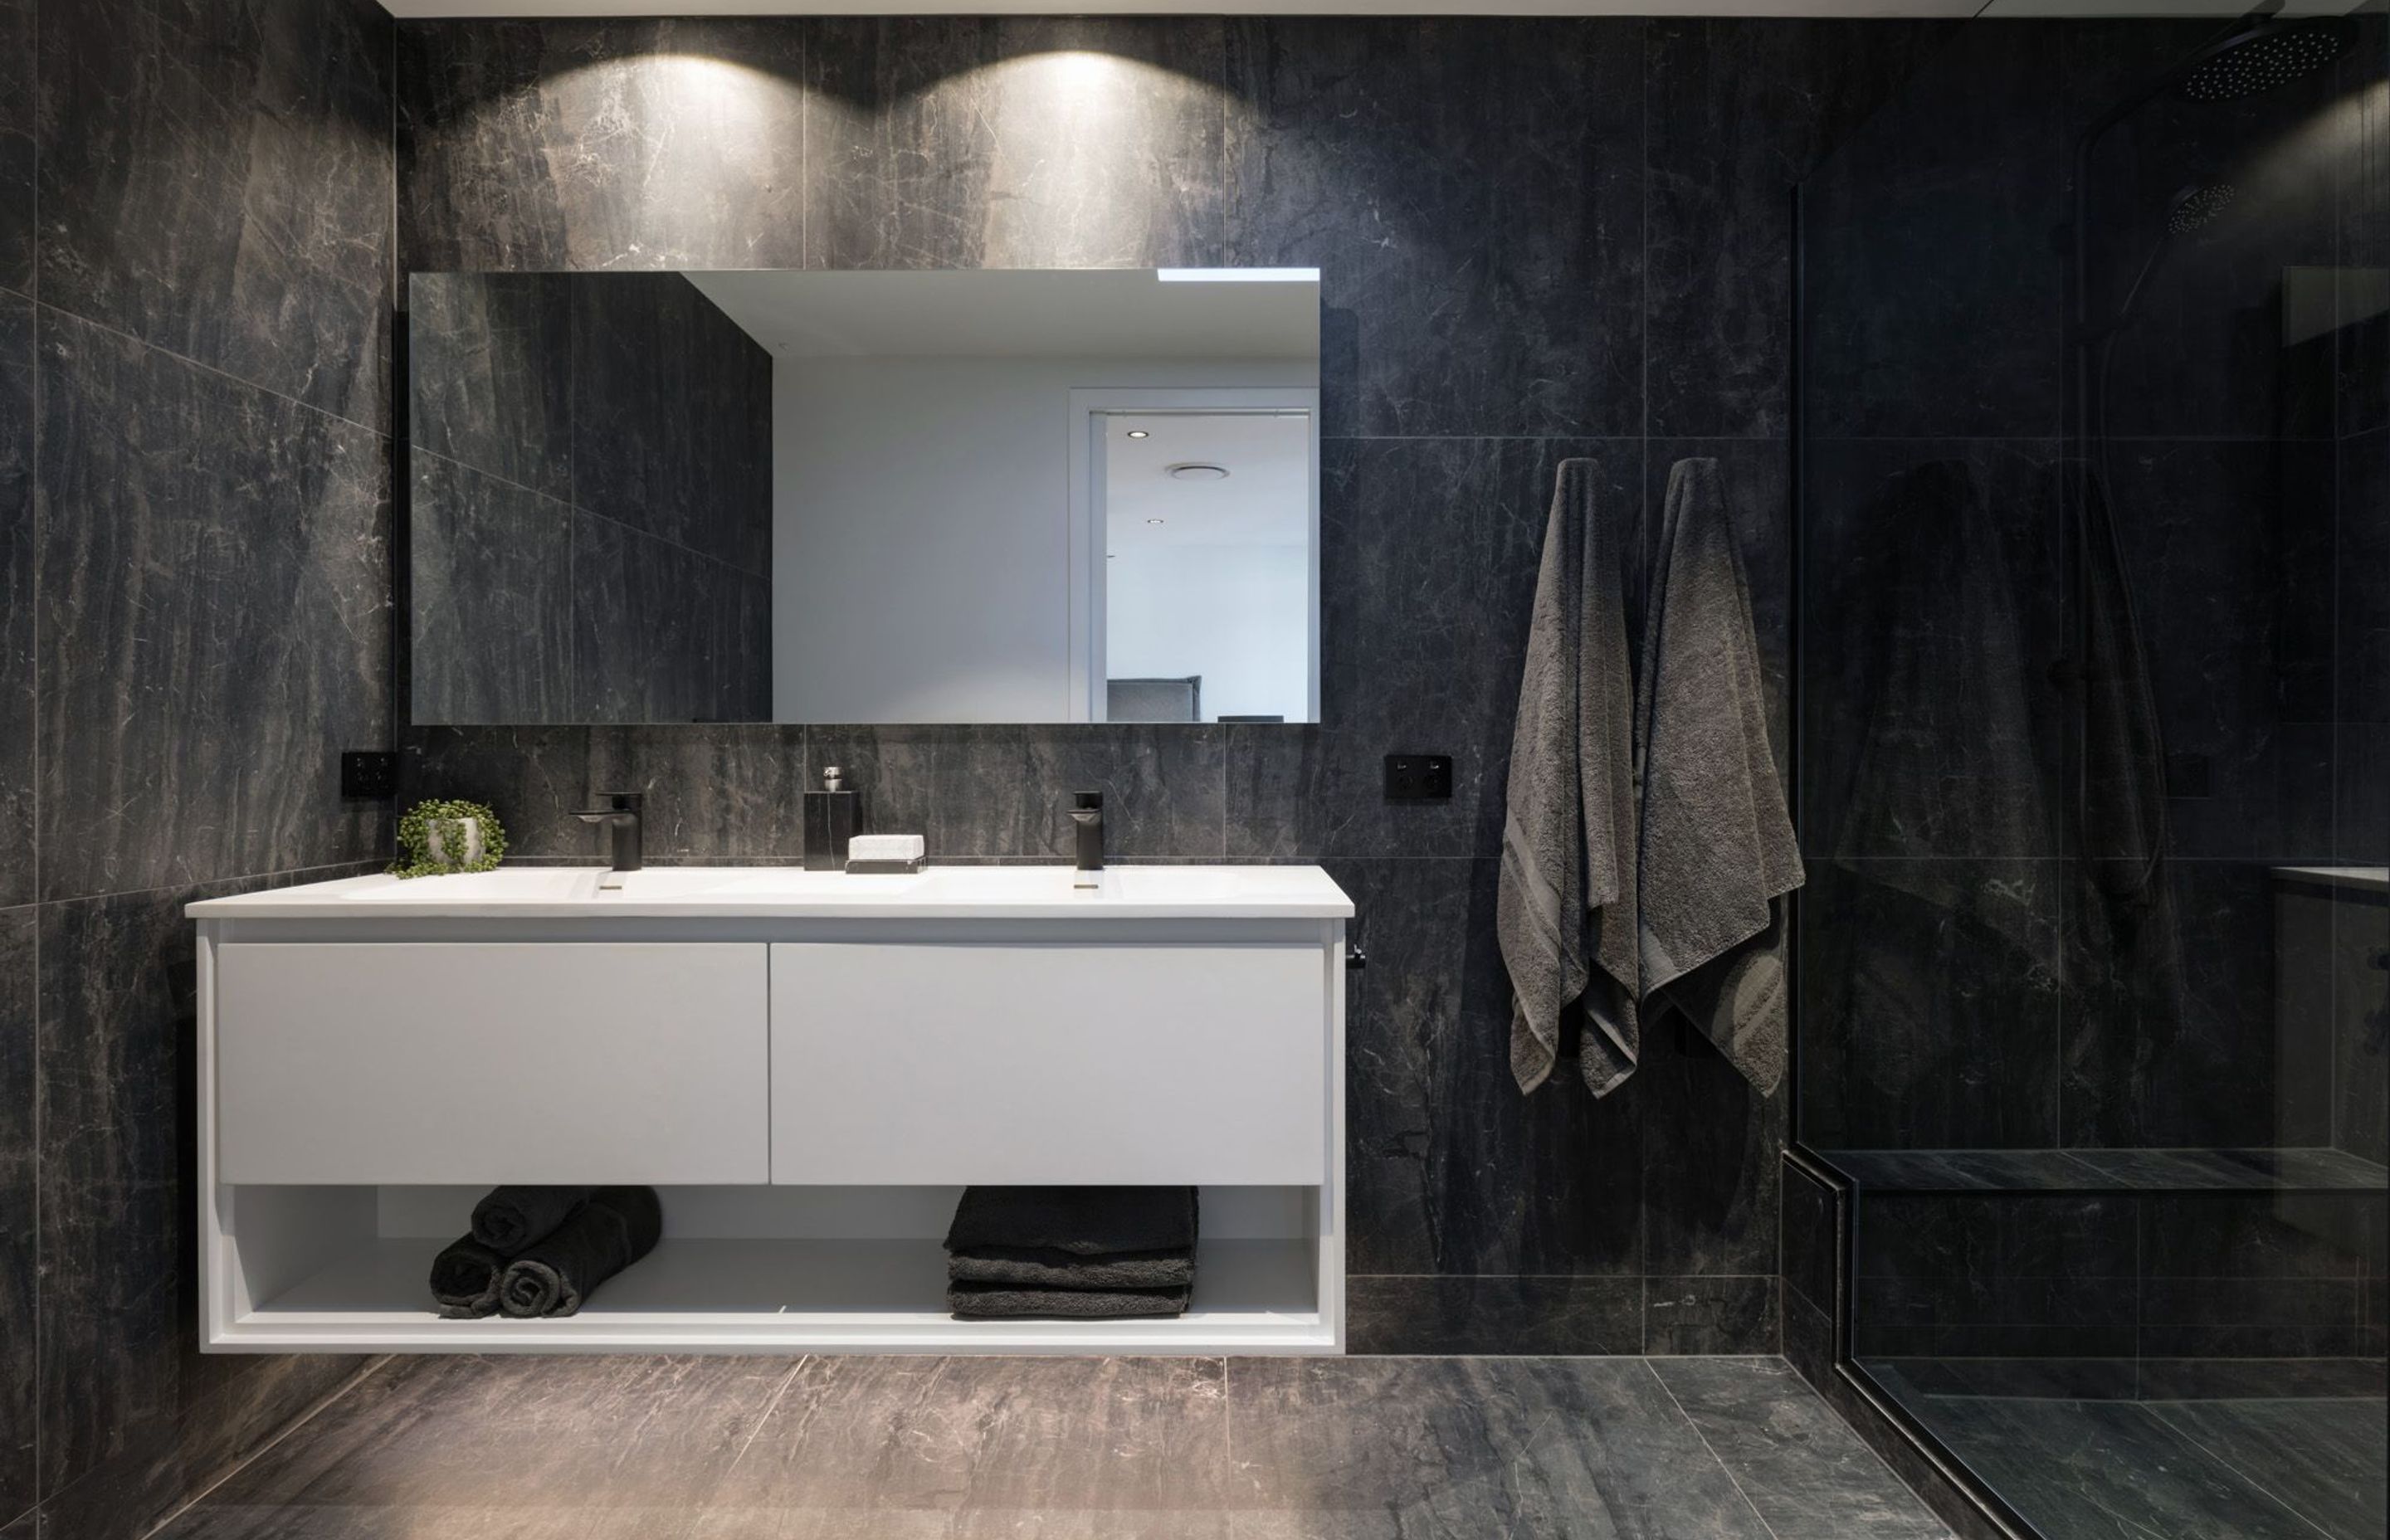 The crisp white bathroom cabinetry appears to hover within this dark space, which is clad in charcoal-grey tiles.